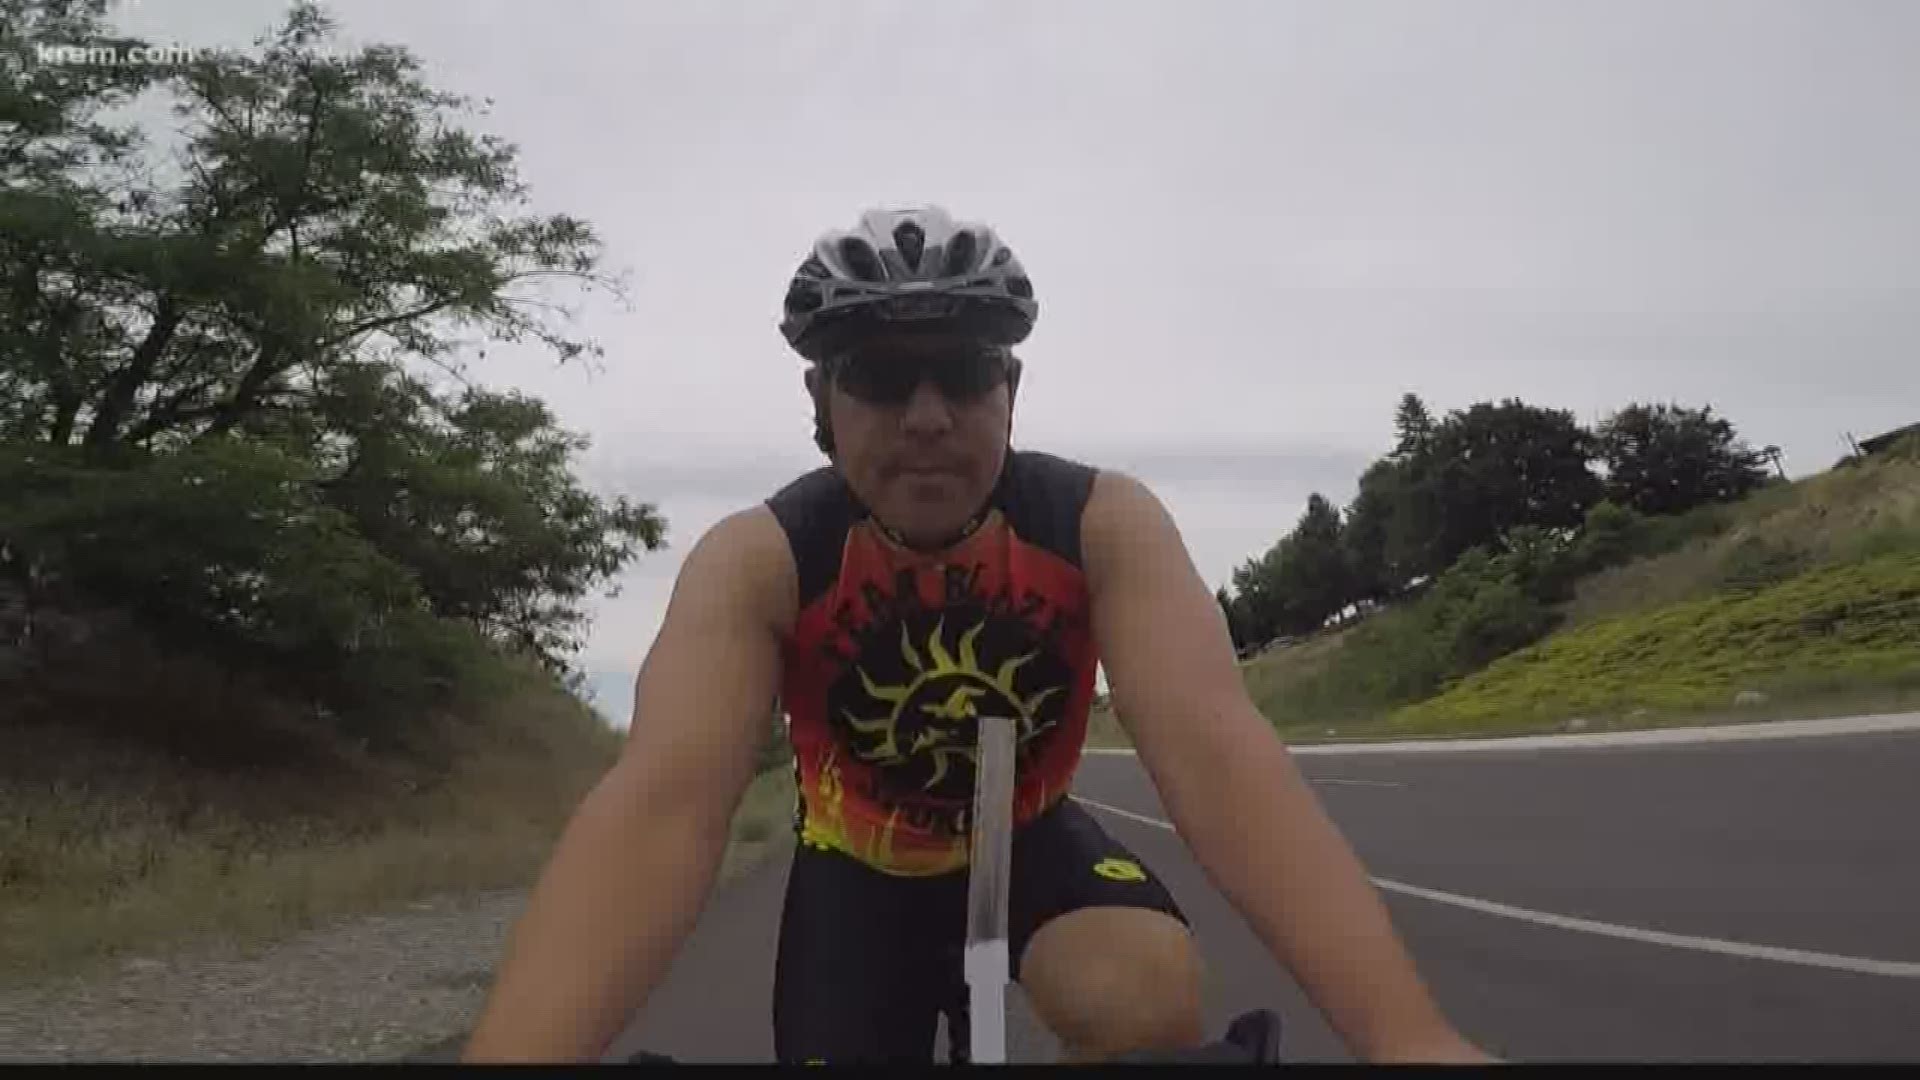 KREM's Taylor Viydo spoke with Travis Melcher, who is competing in the Coeur d'Alene half-Ironman for suicide prevention after losing his two brothers to suicide.